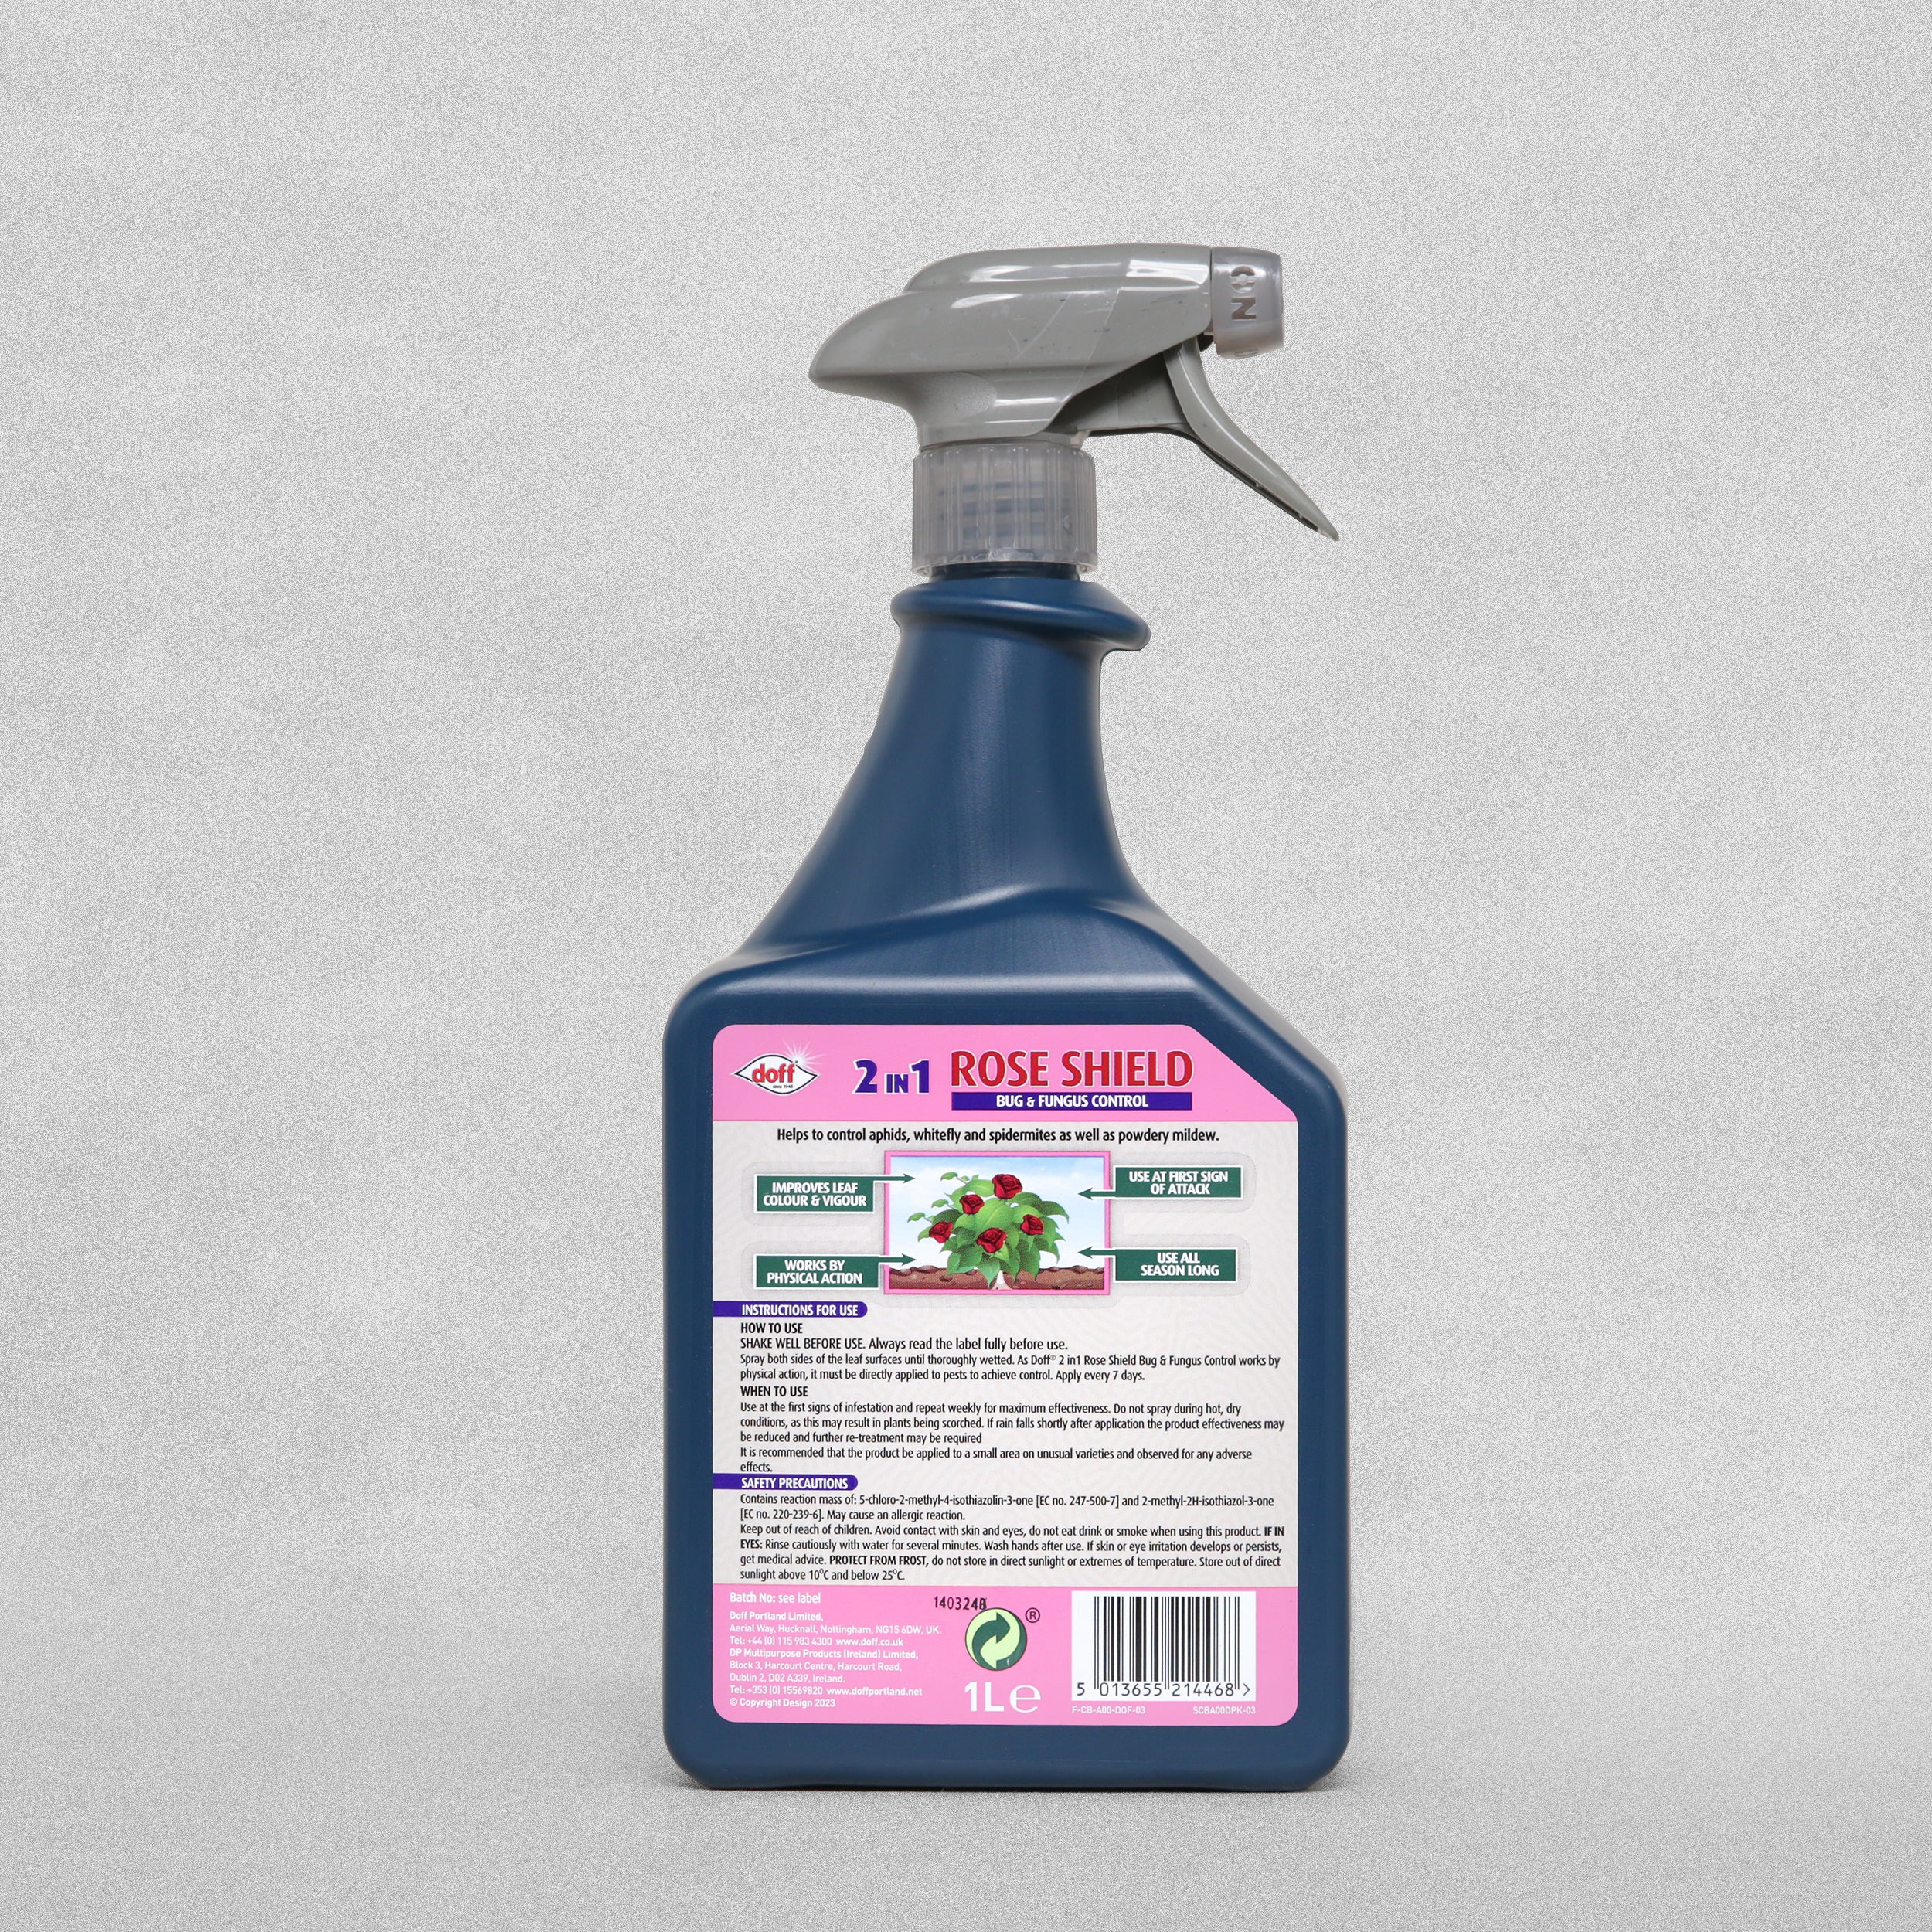 Doff 2 in 1 Rose Shield Bug and Fungus Control - 1L